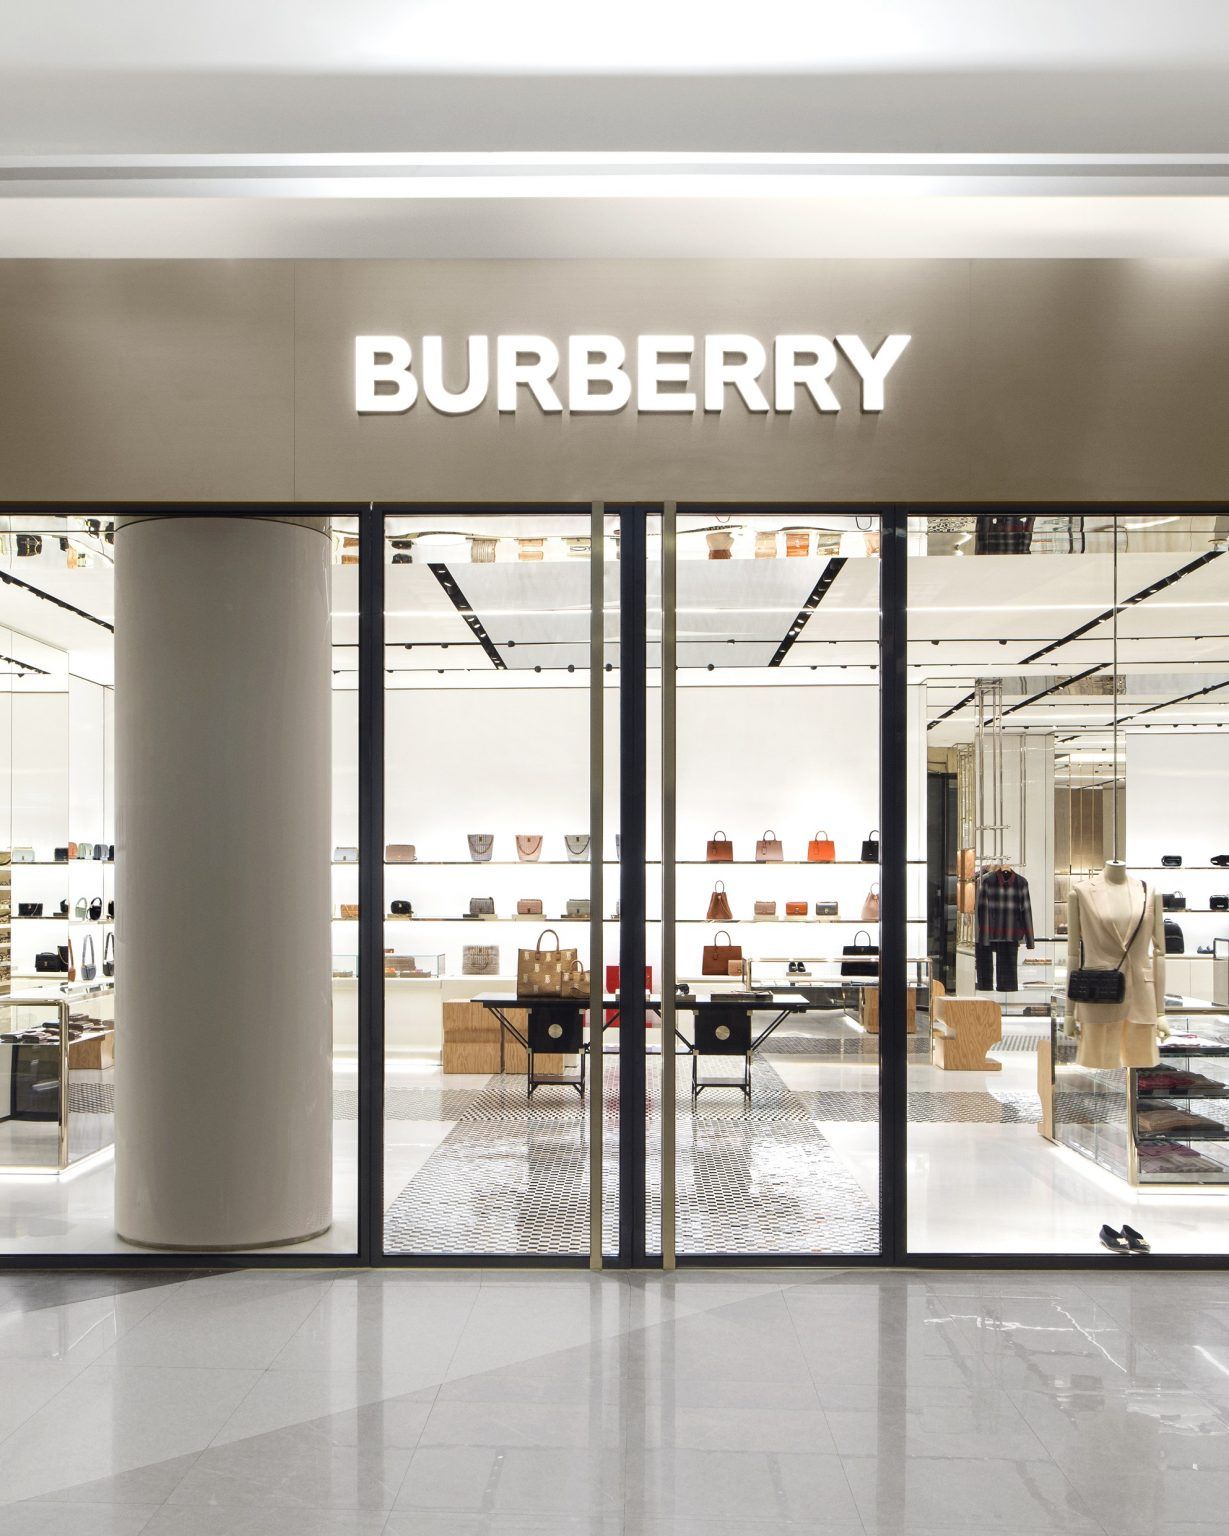 Burberry Opens the Doors to its New Store in Siam Paragon